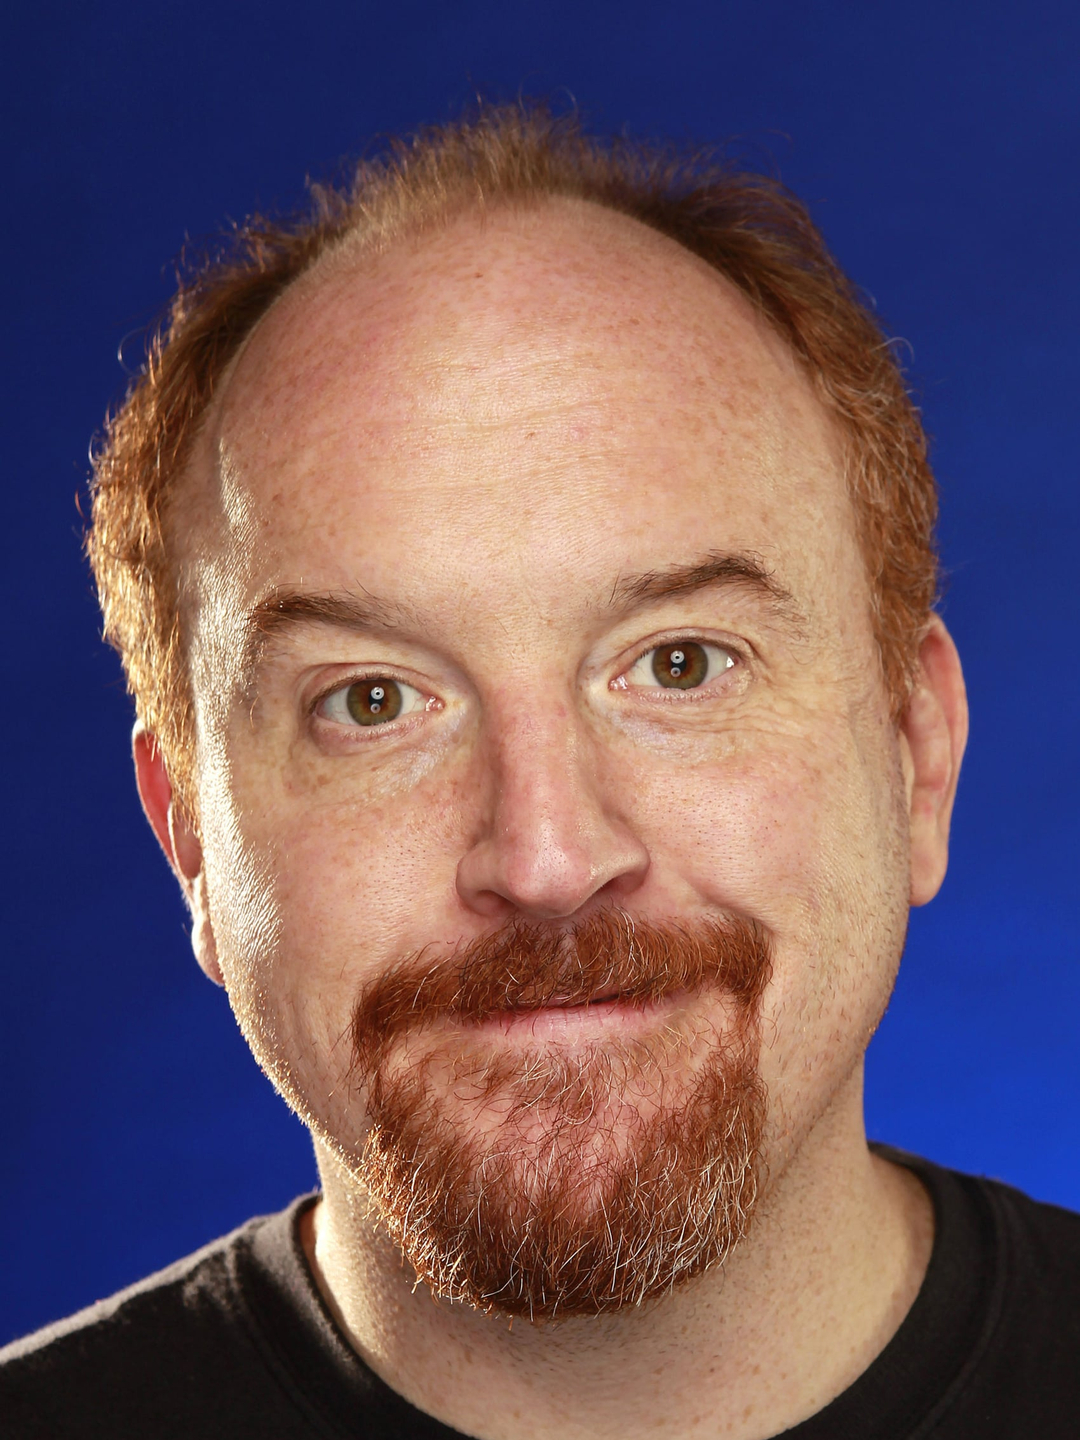 Louis C.K. who is his father